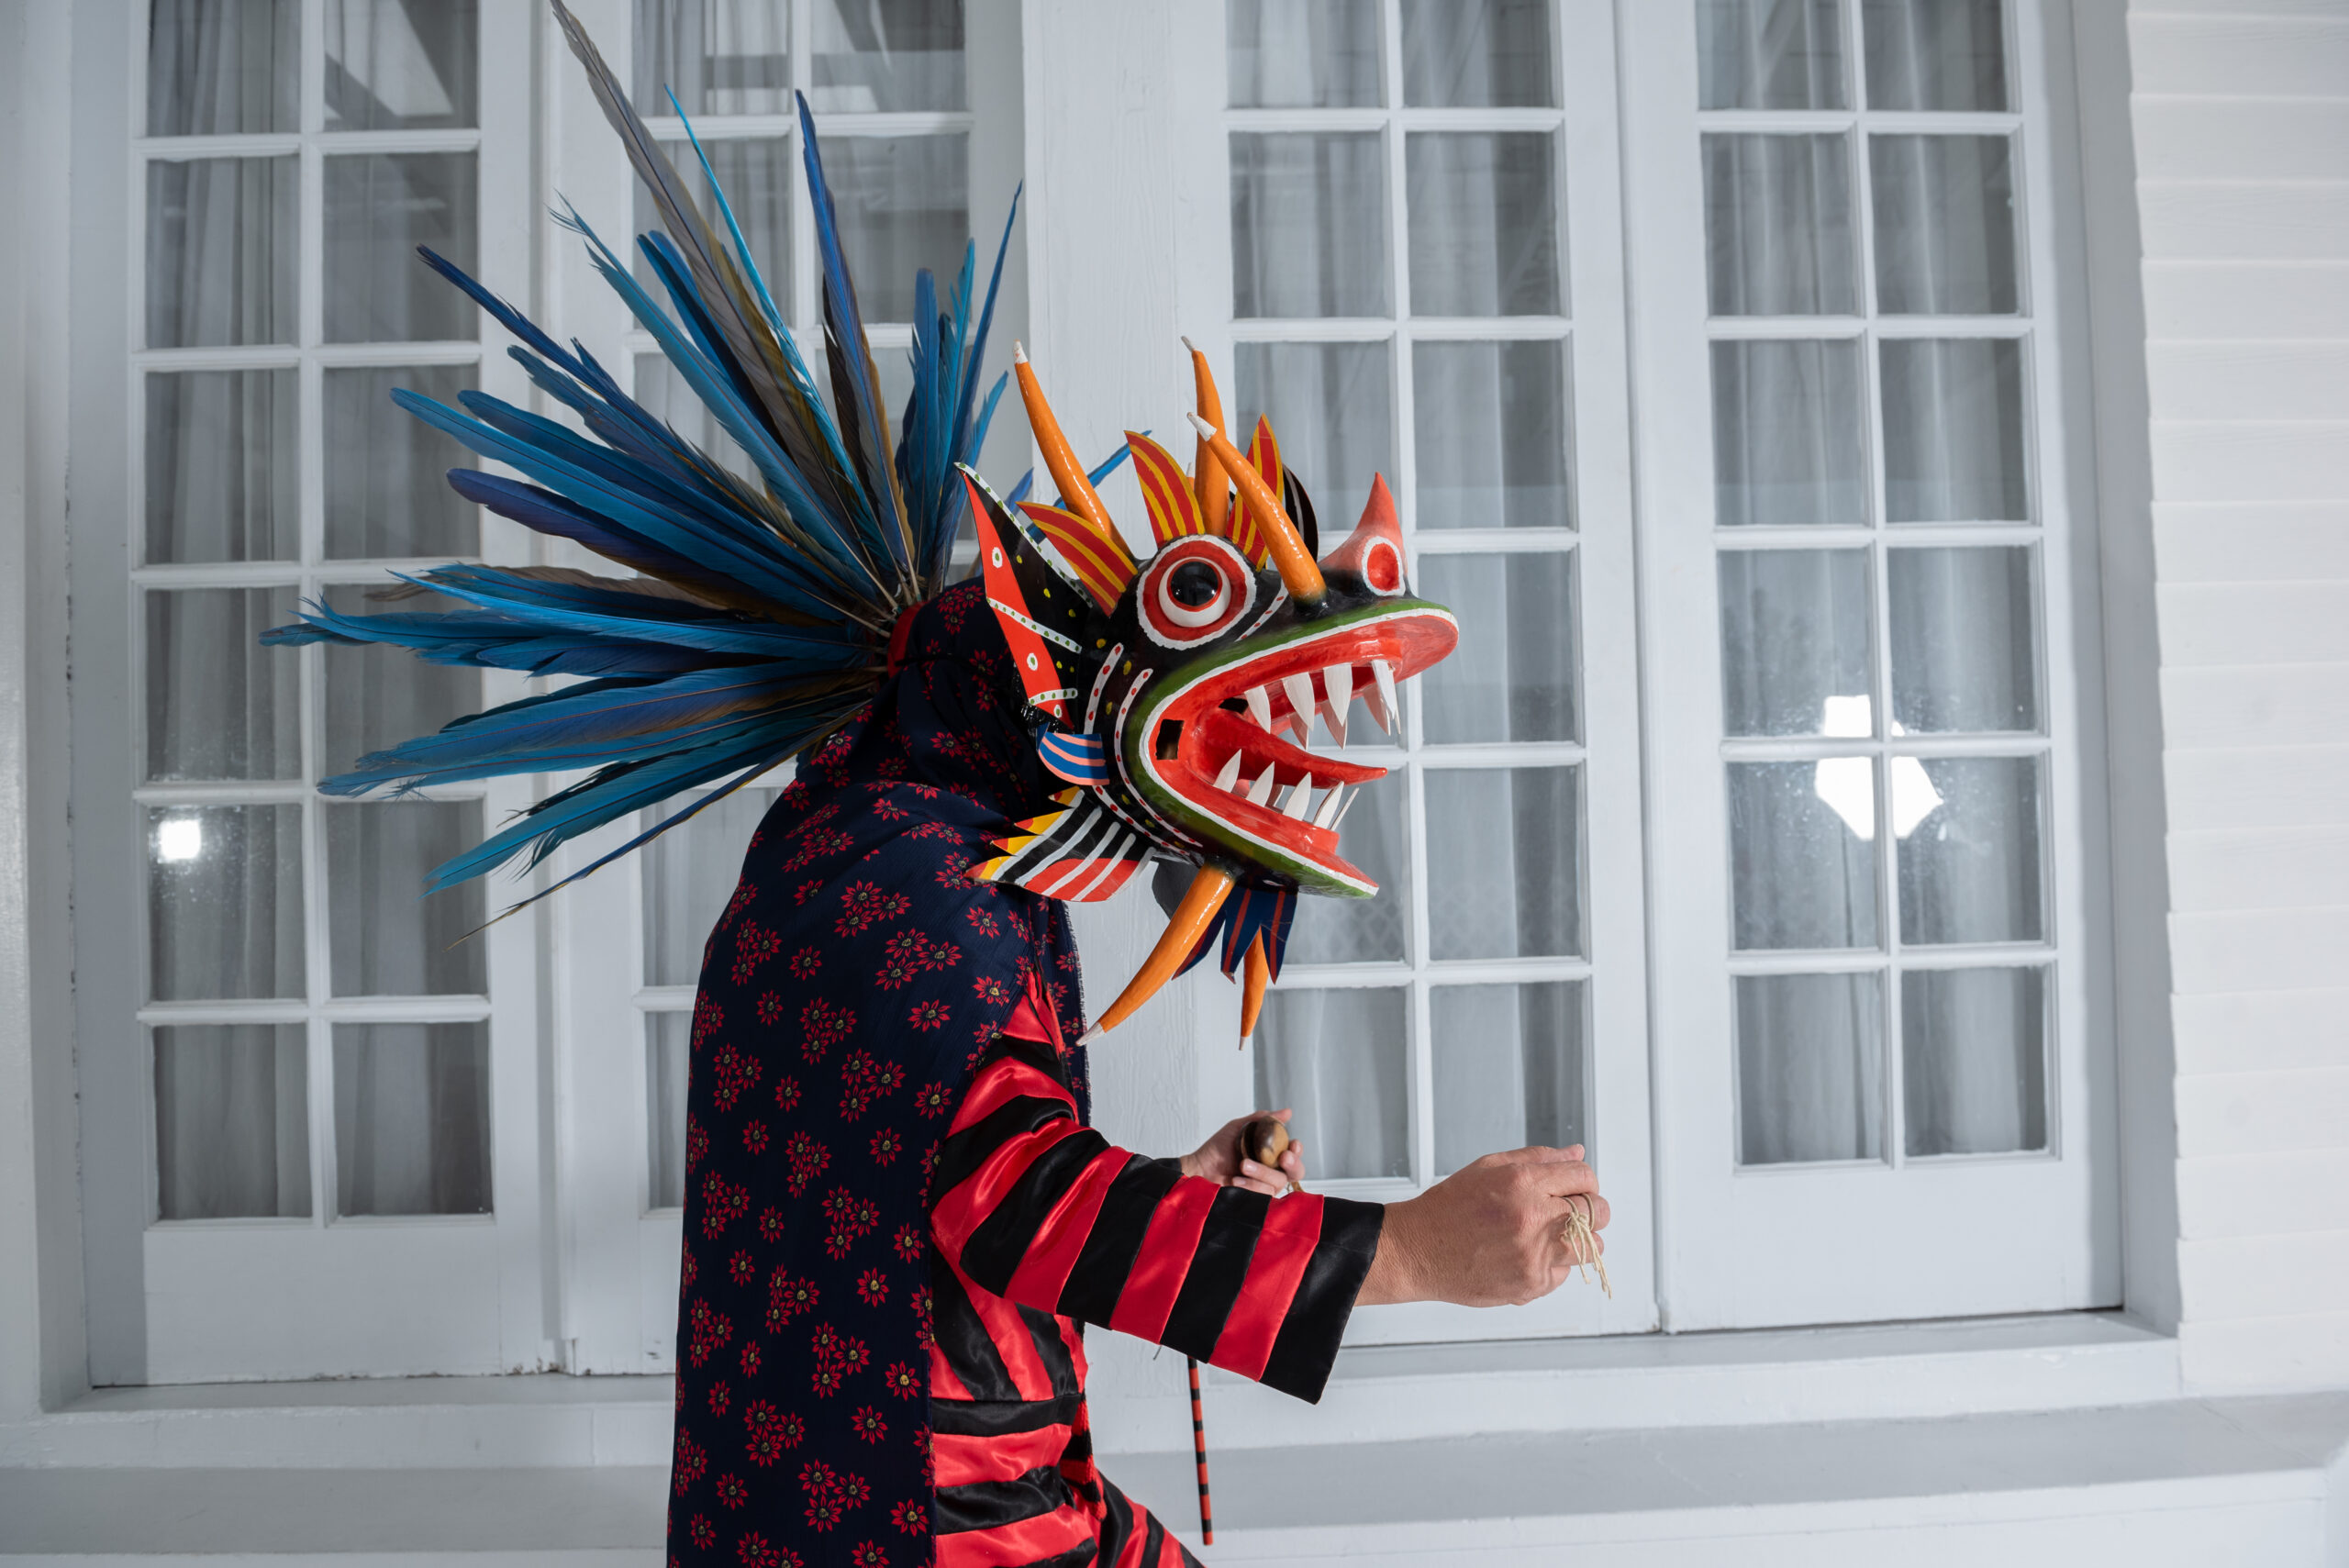 A dancer wears a red and black striped shirt and cape. He wears a colorful mask depicting a devil with large teeth, horns, and with feathers fanning out on top of the head.